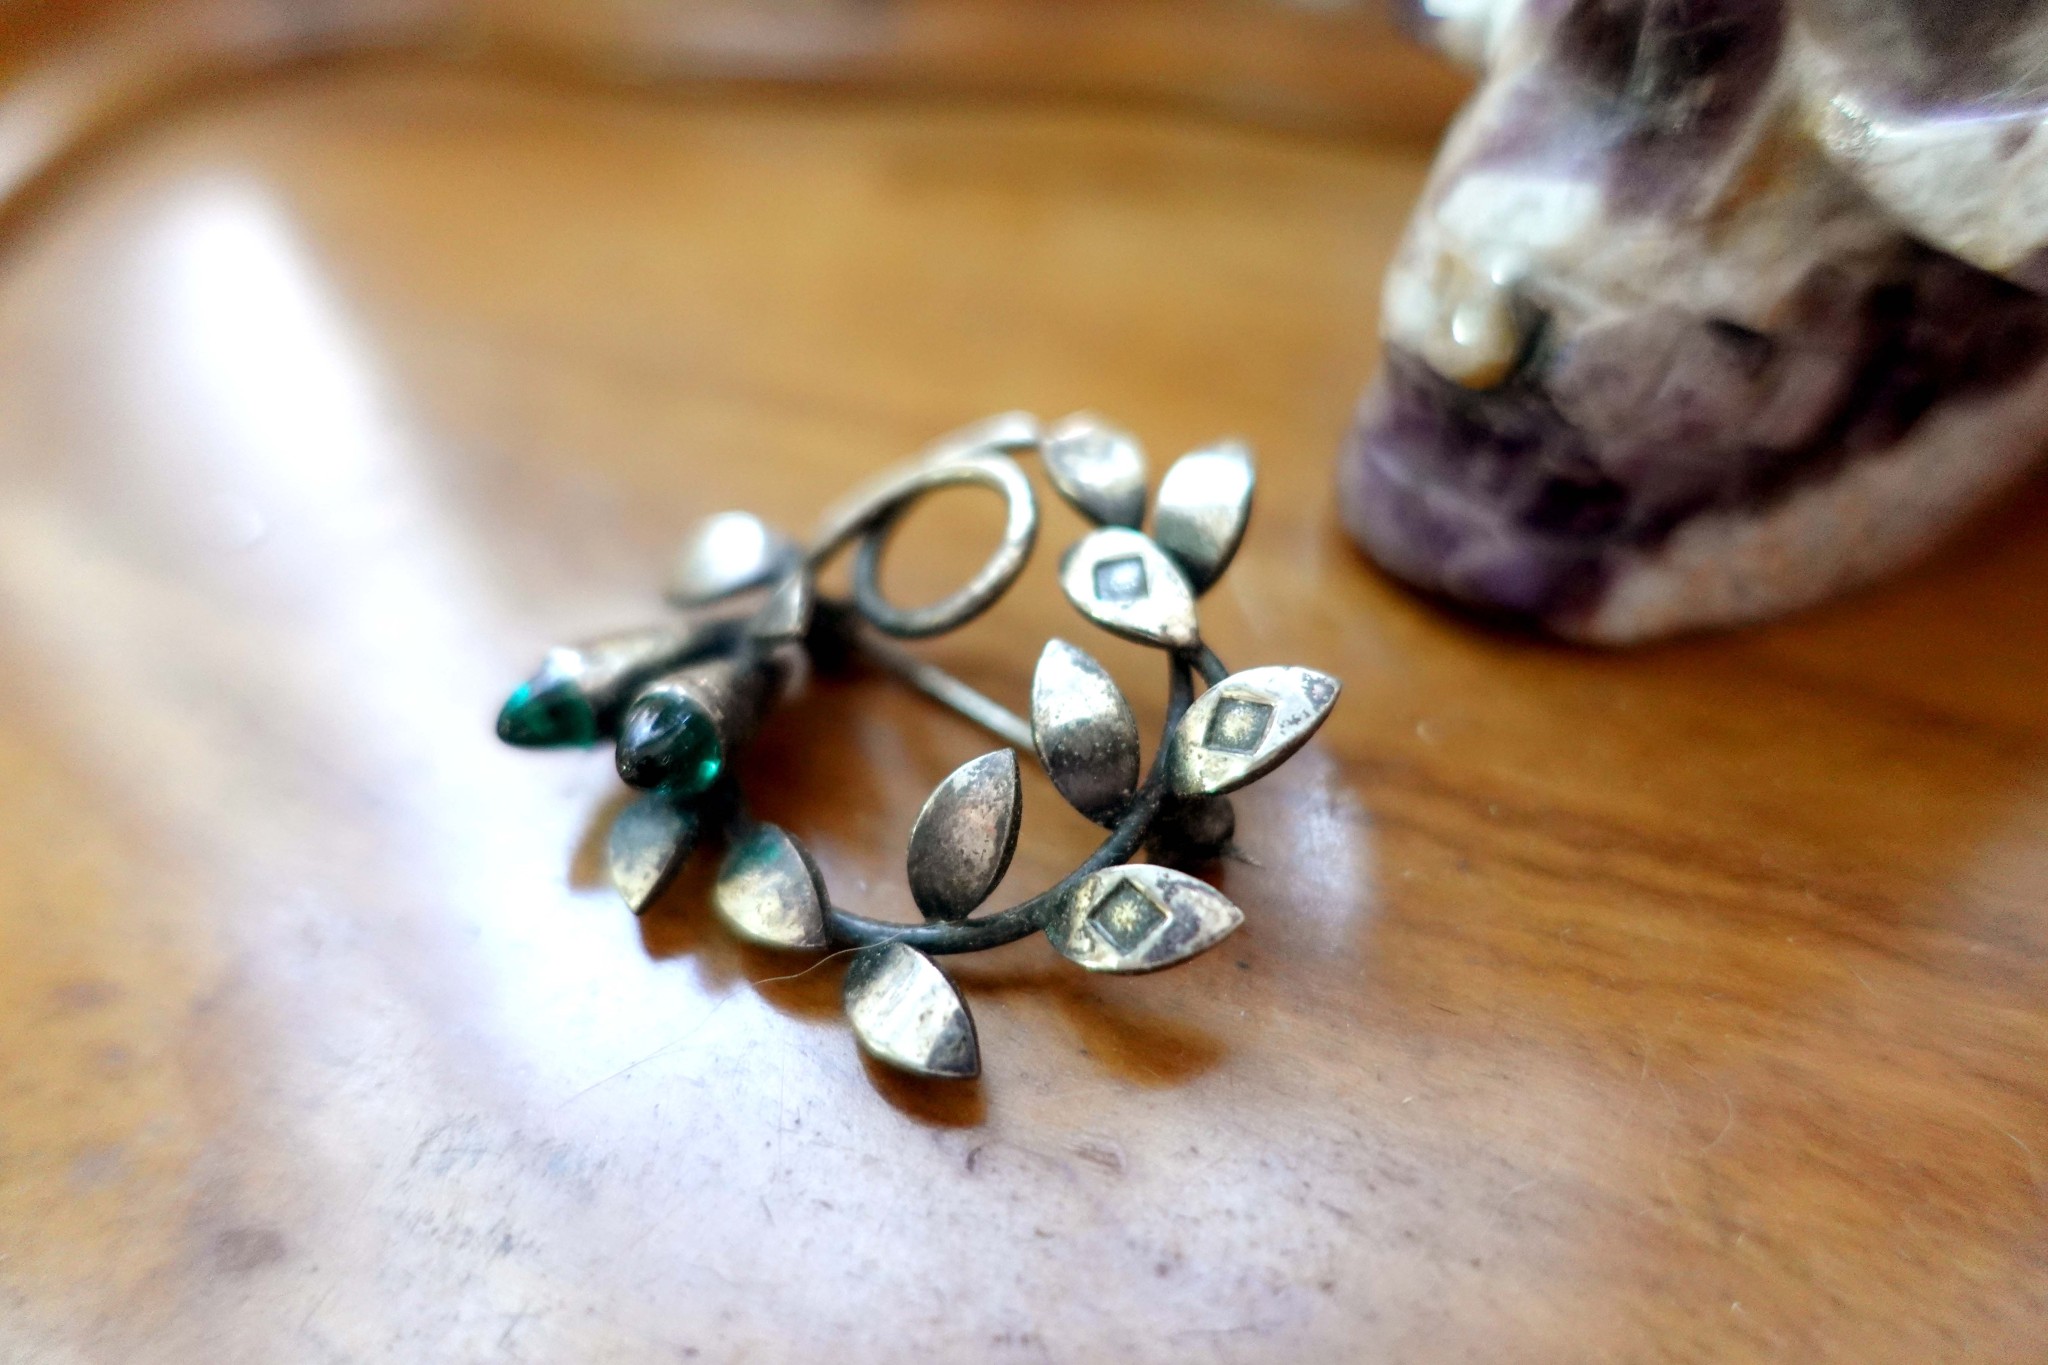 Womens Brooch Sterling Silver Branch With Flowers And Leaves